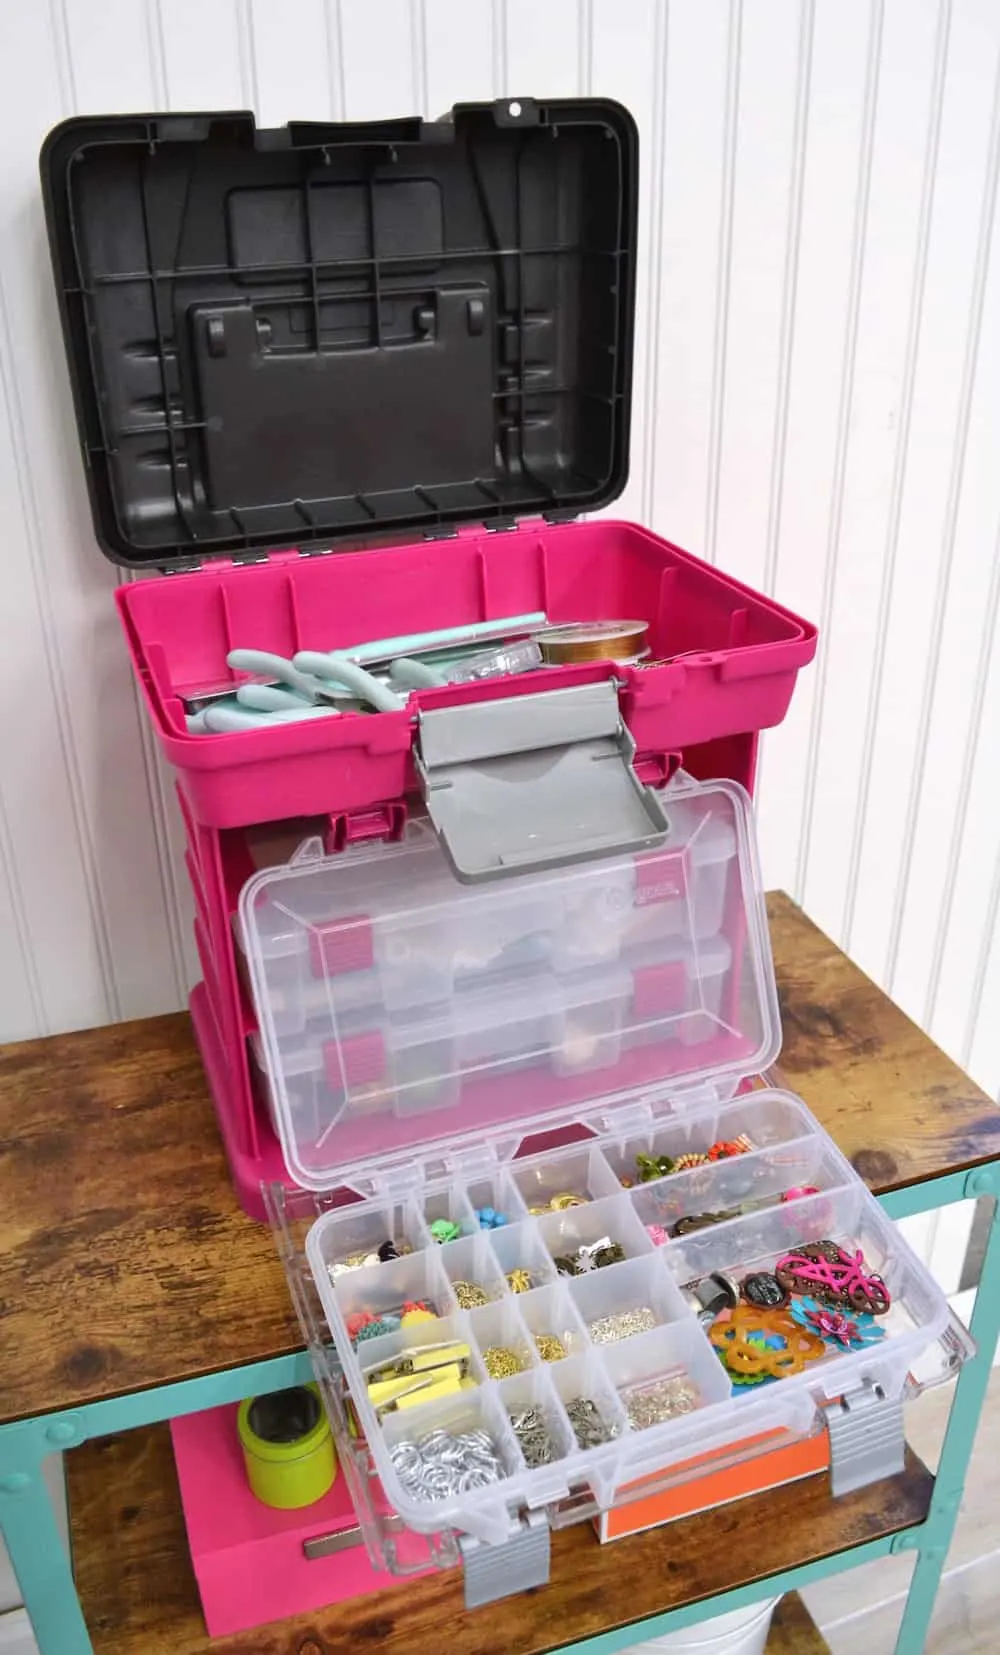 Large jewelry organizer with plastic containers and compartments